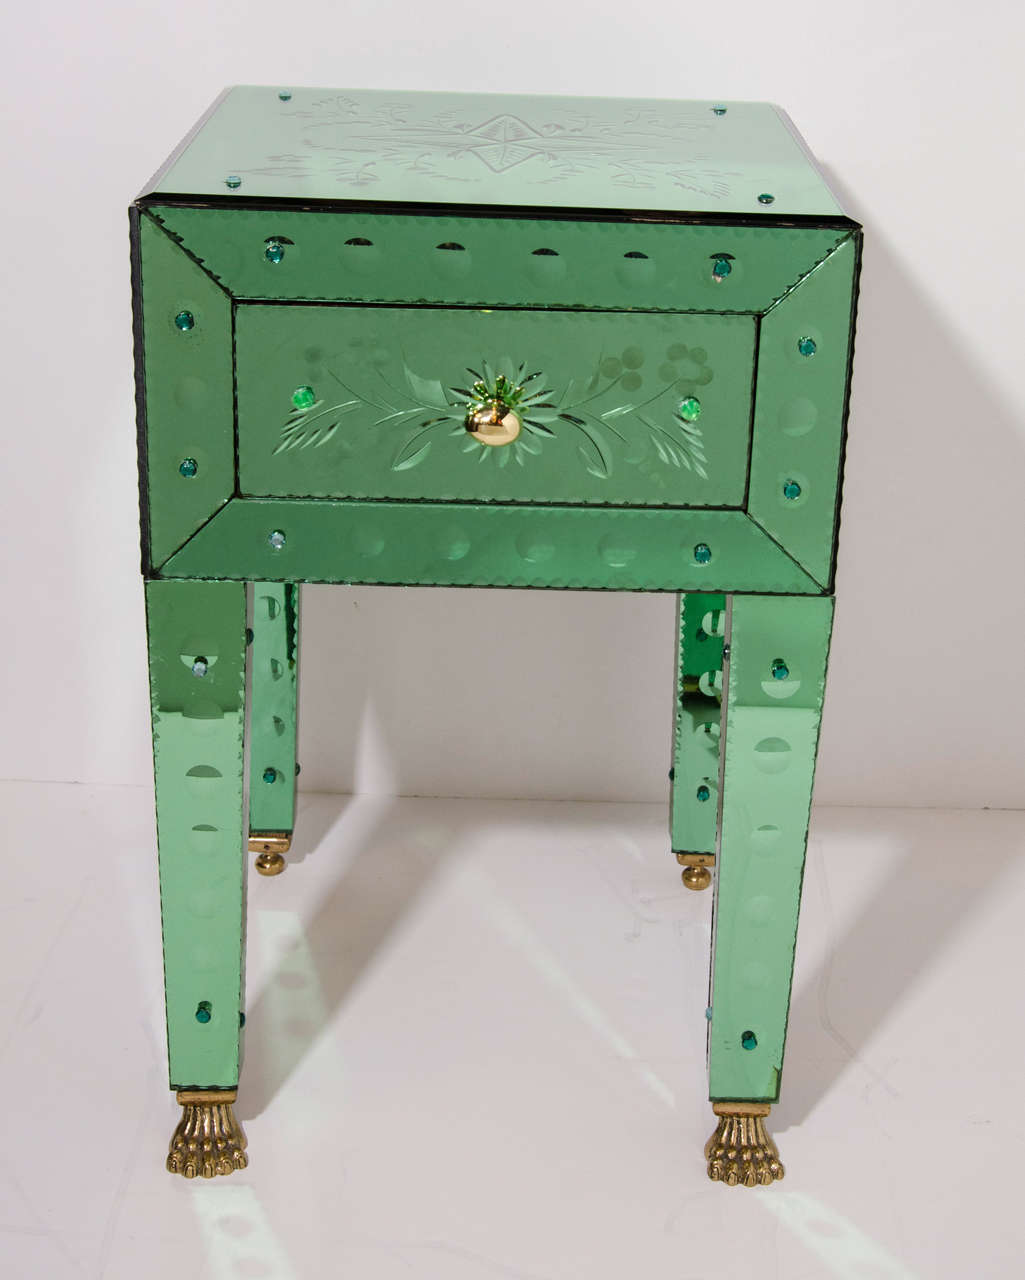 Pair of exquisite Venetian mirrored end tables with emerald green tinted glass.  The end tables / night stands  have a series of reverse etched floral designs as well as convex circle patterns throughout the legs and fronts. The tables have chain